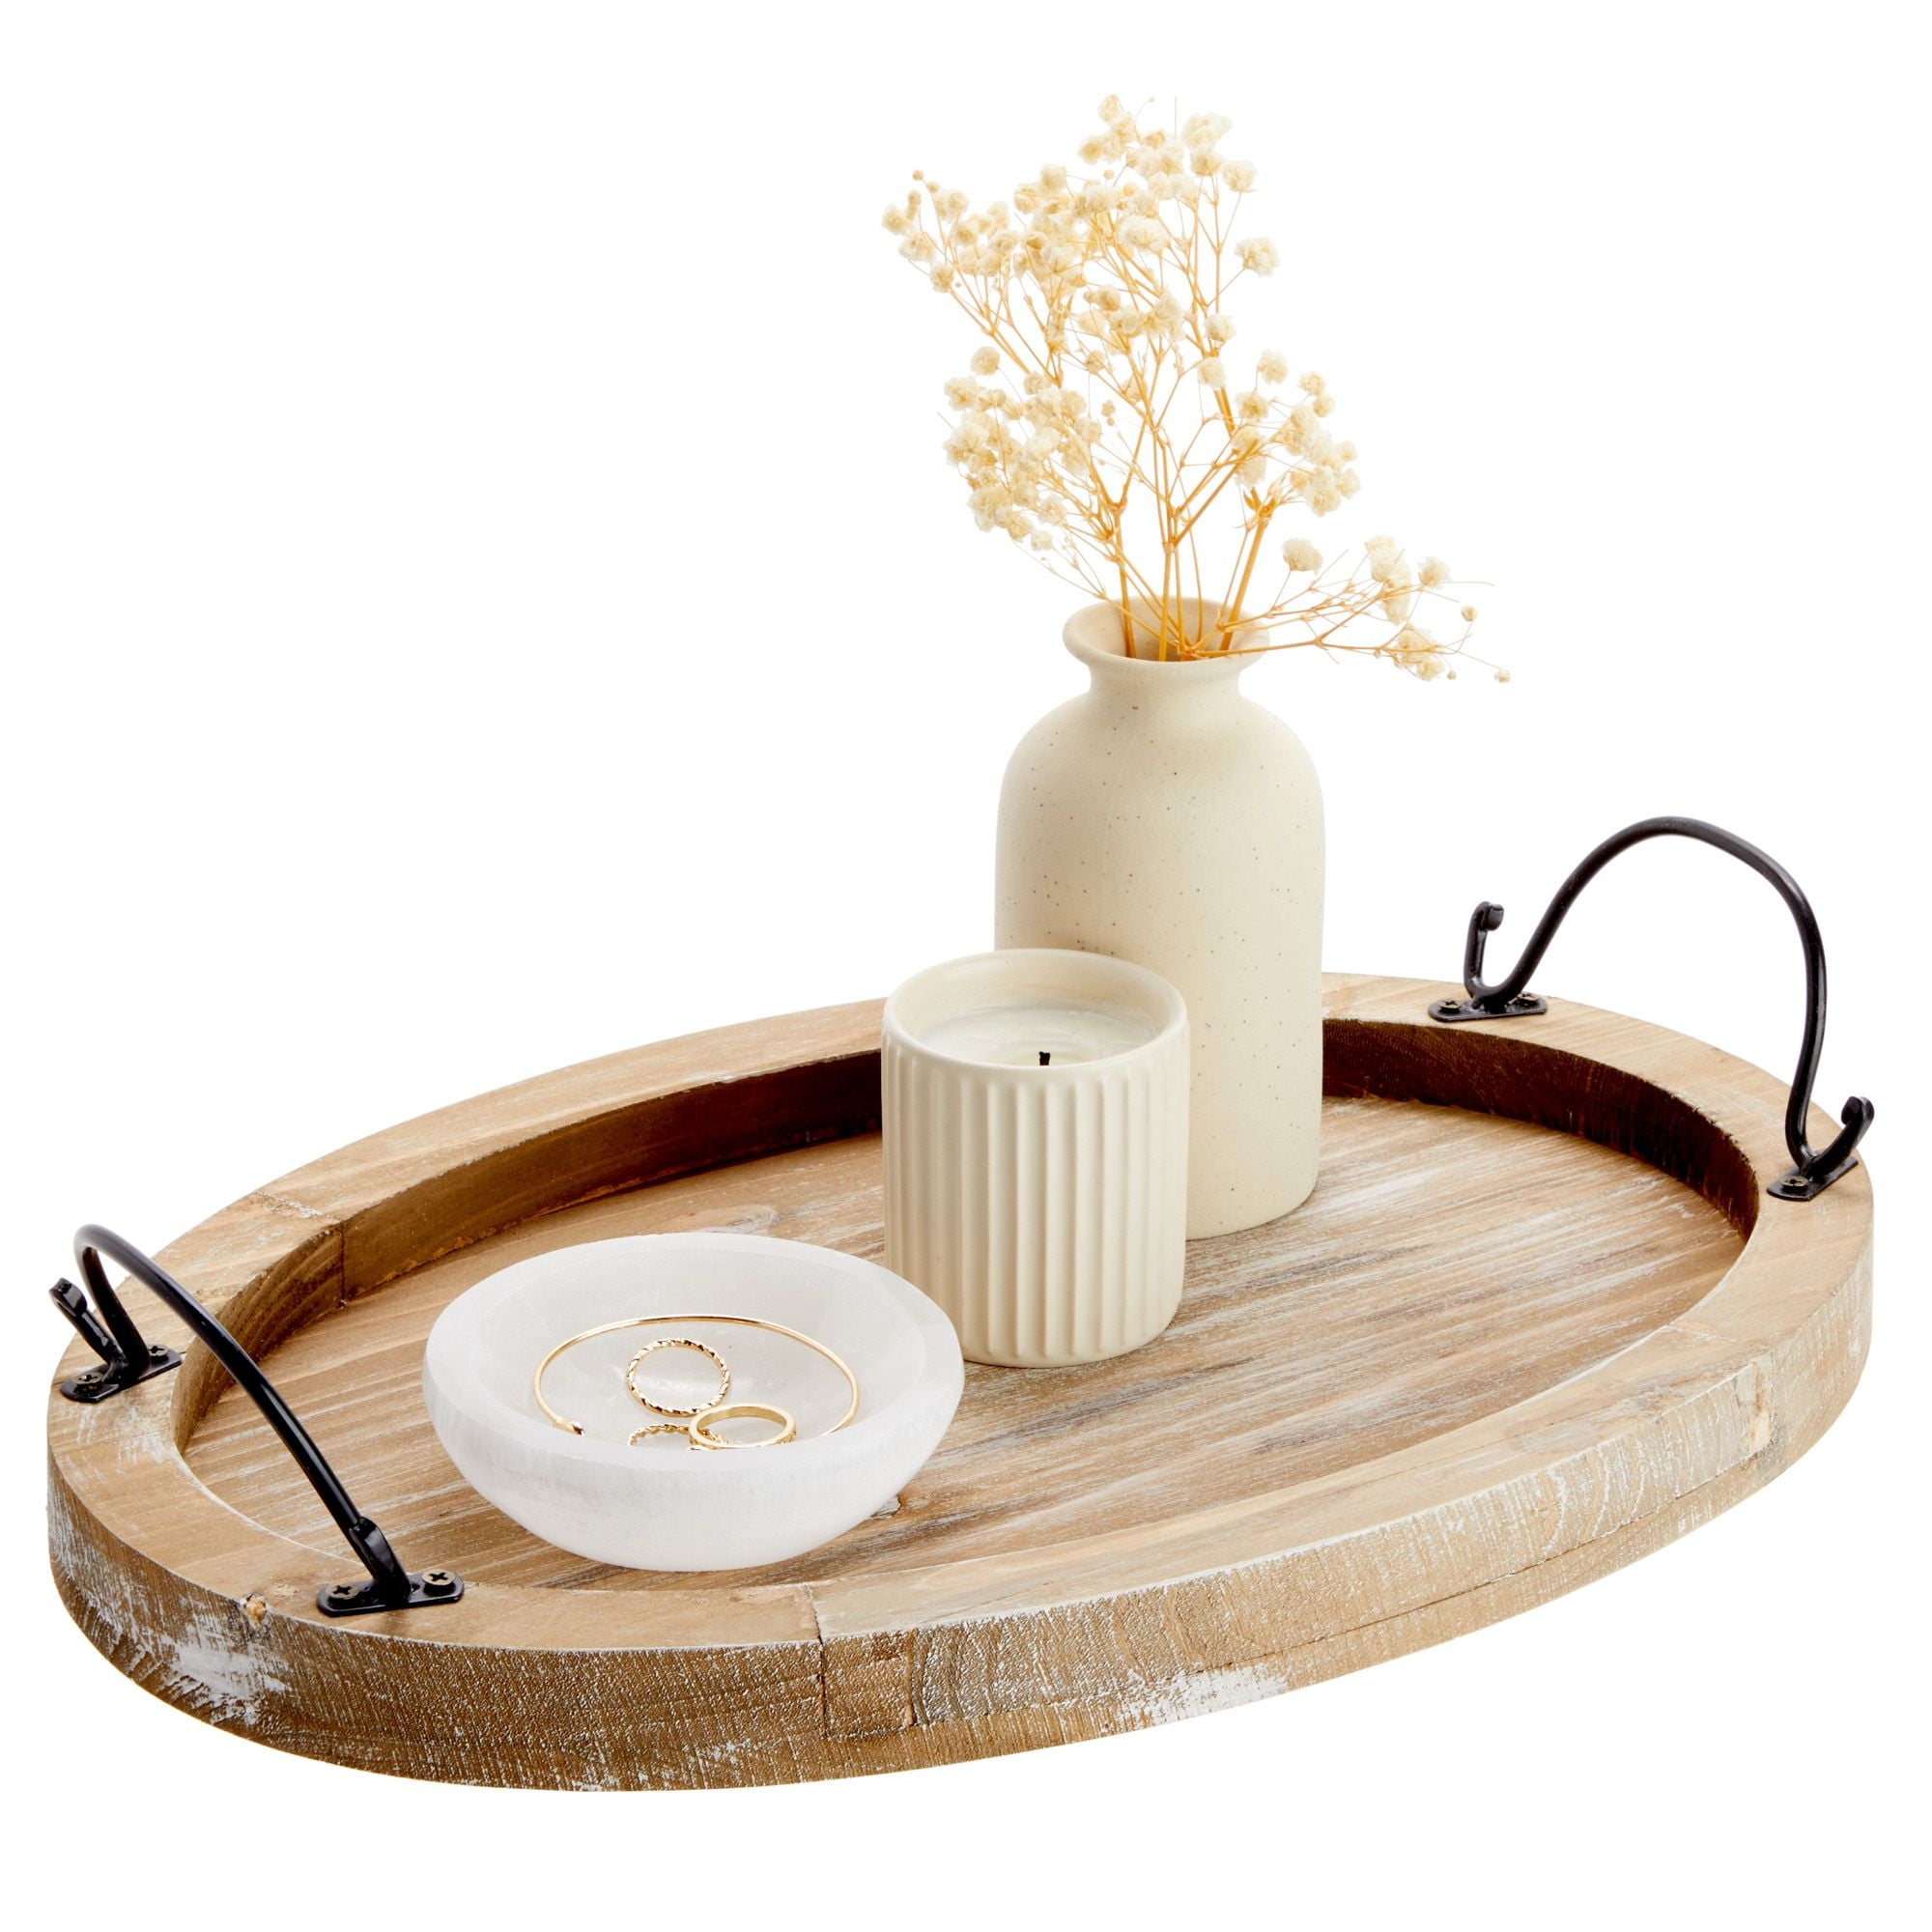 Oval Wooden Serving Tray with Handles, Decorative Platter for Coffee Table,  Living Room (15.75 x 10.8 x 1.25 In)